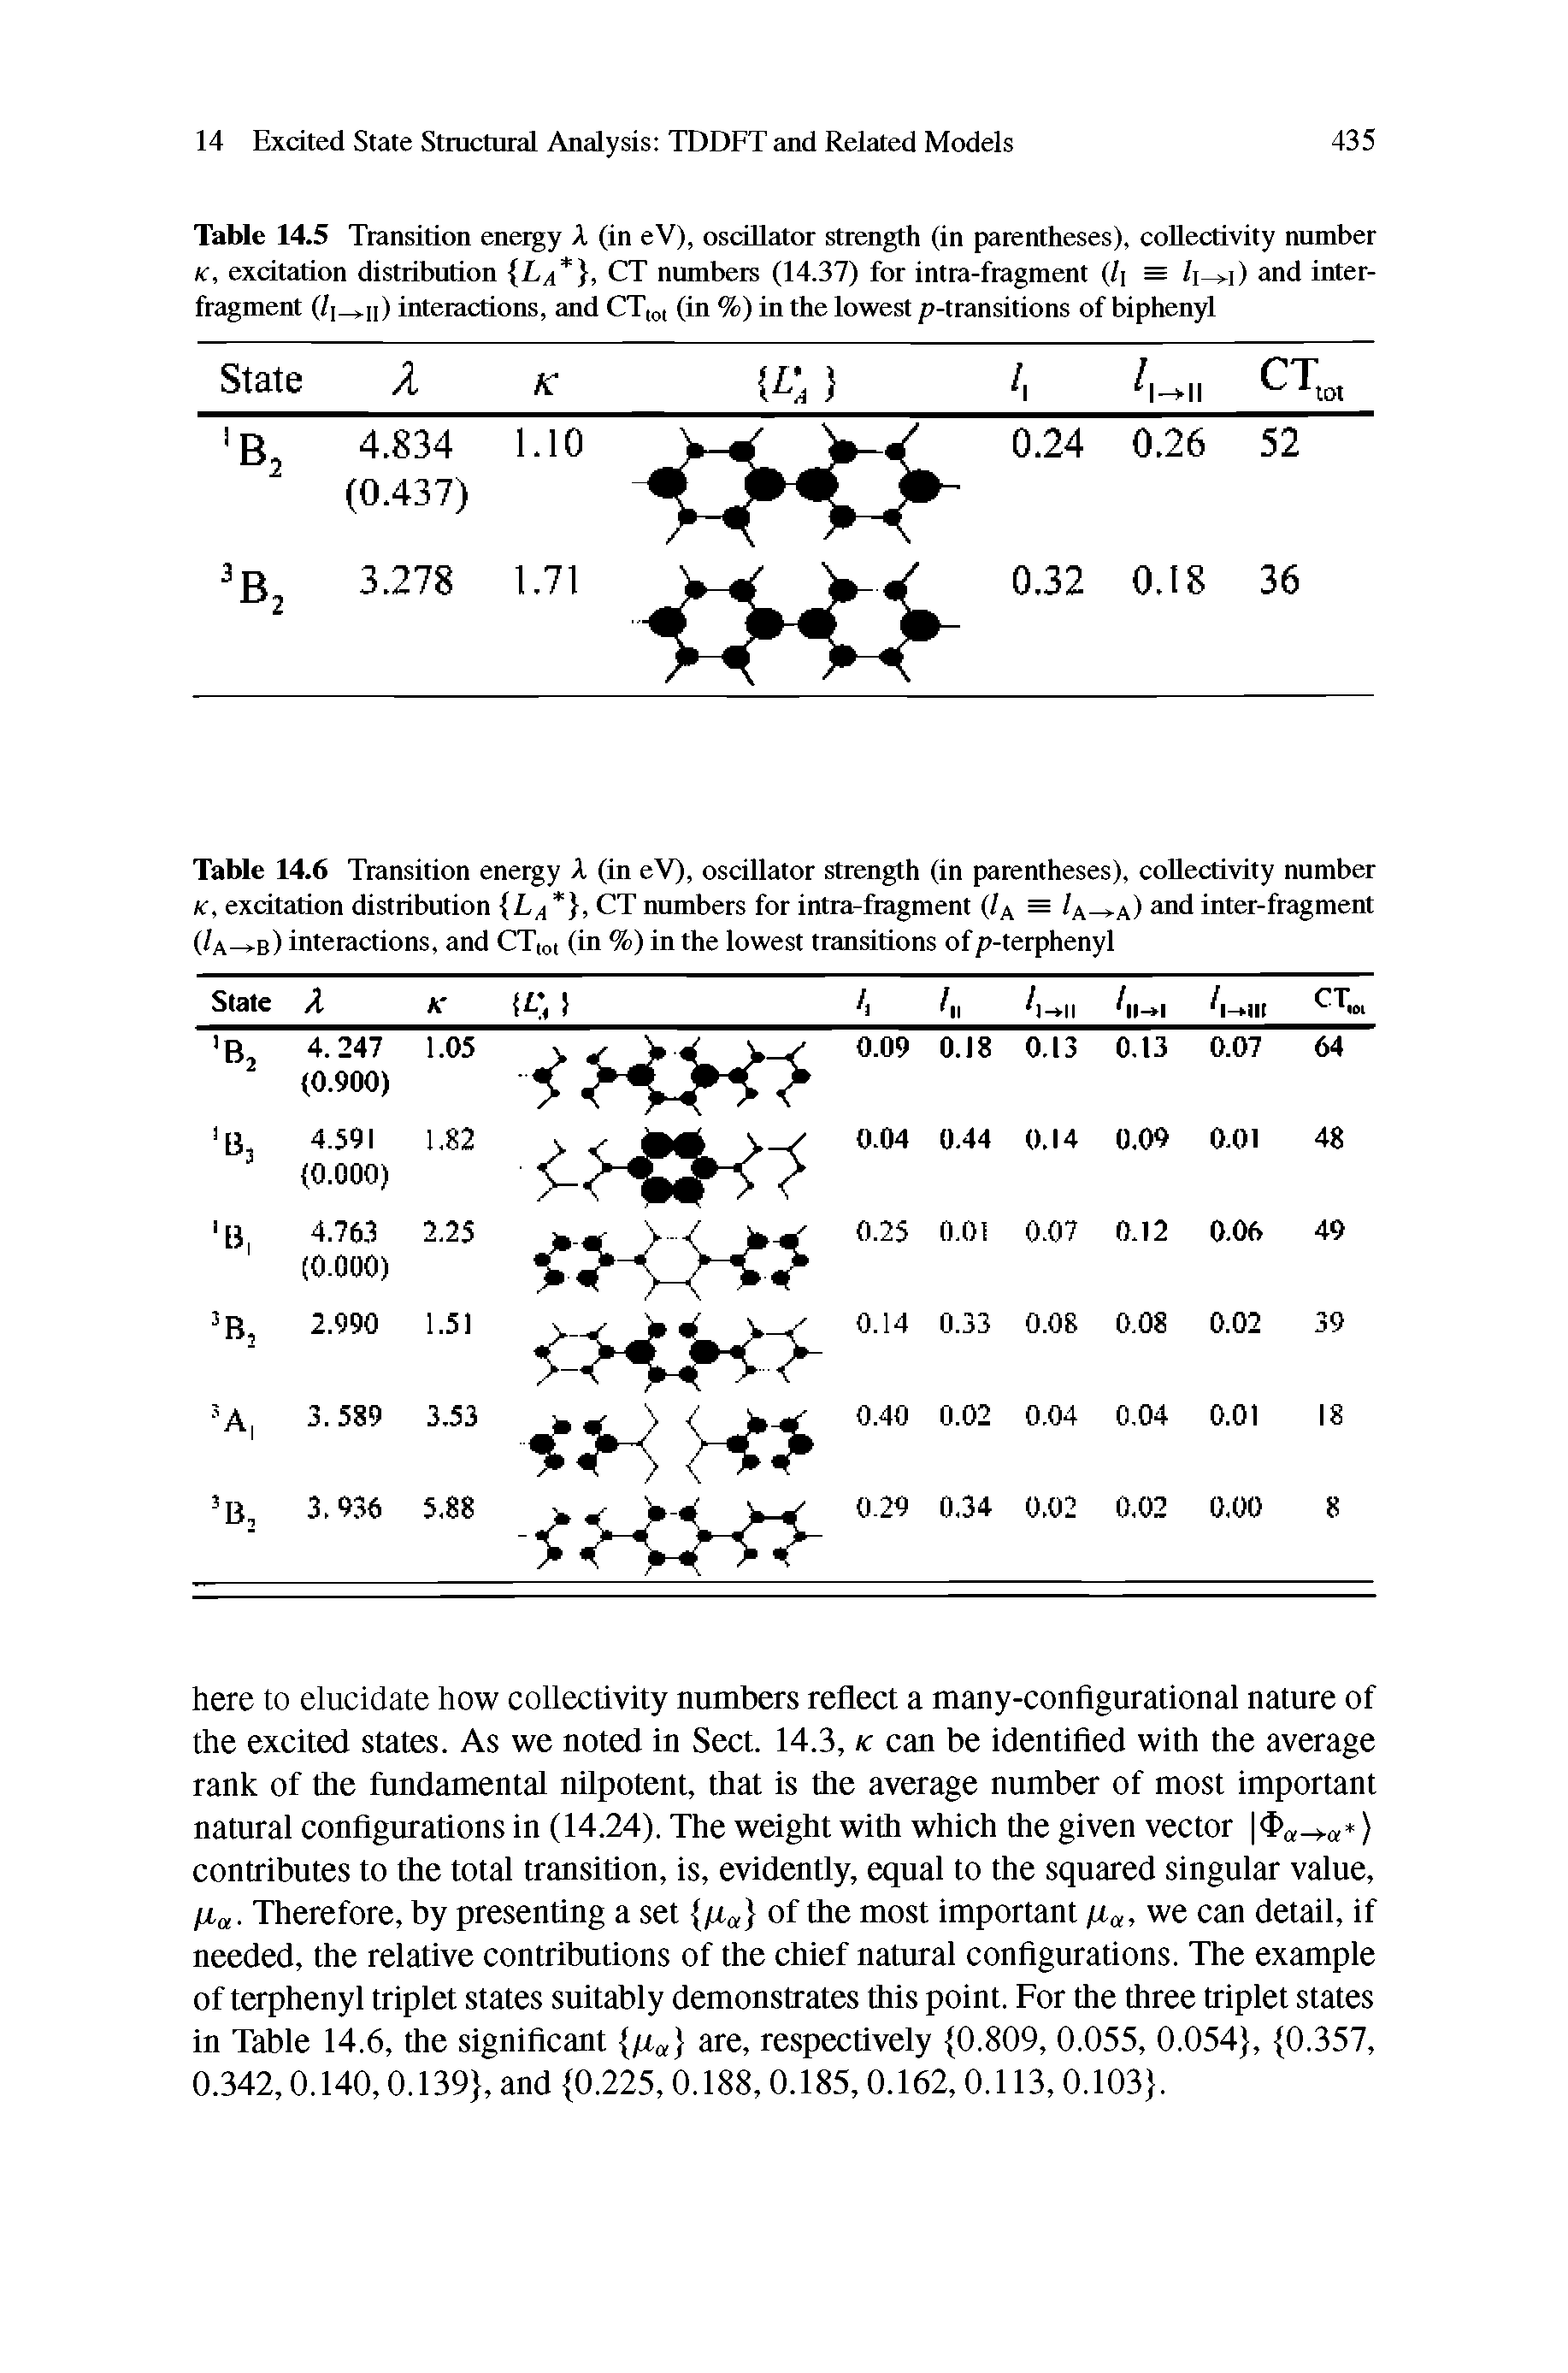 Table 14.5 Transition energy A (in eV), osdUator strength (in parentheses), collectivity number K, excitation distribution La, CT numbers (14.37) for intra-fragment (/i = h->-]) and interfragment (/i- ii) interactions, and CT,ot (in %) in the lowest p-transitions of biphenyl...